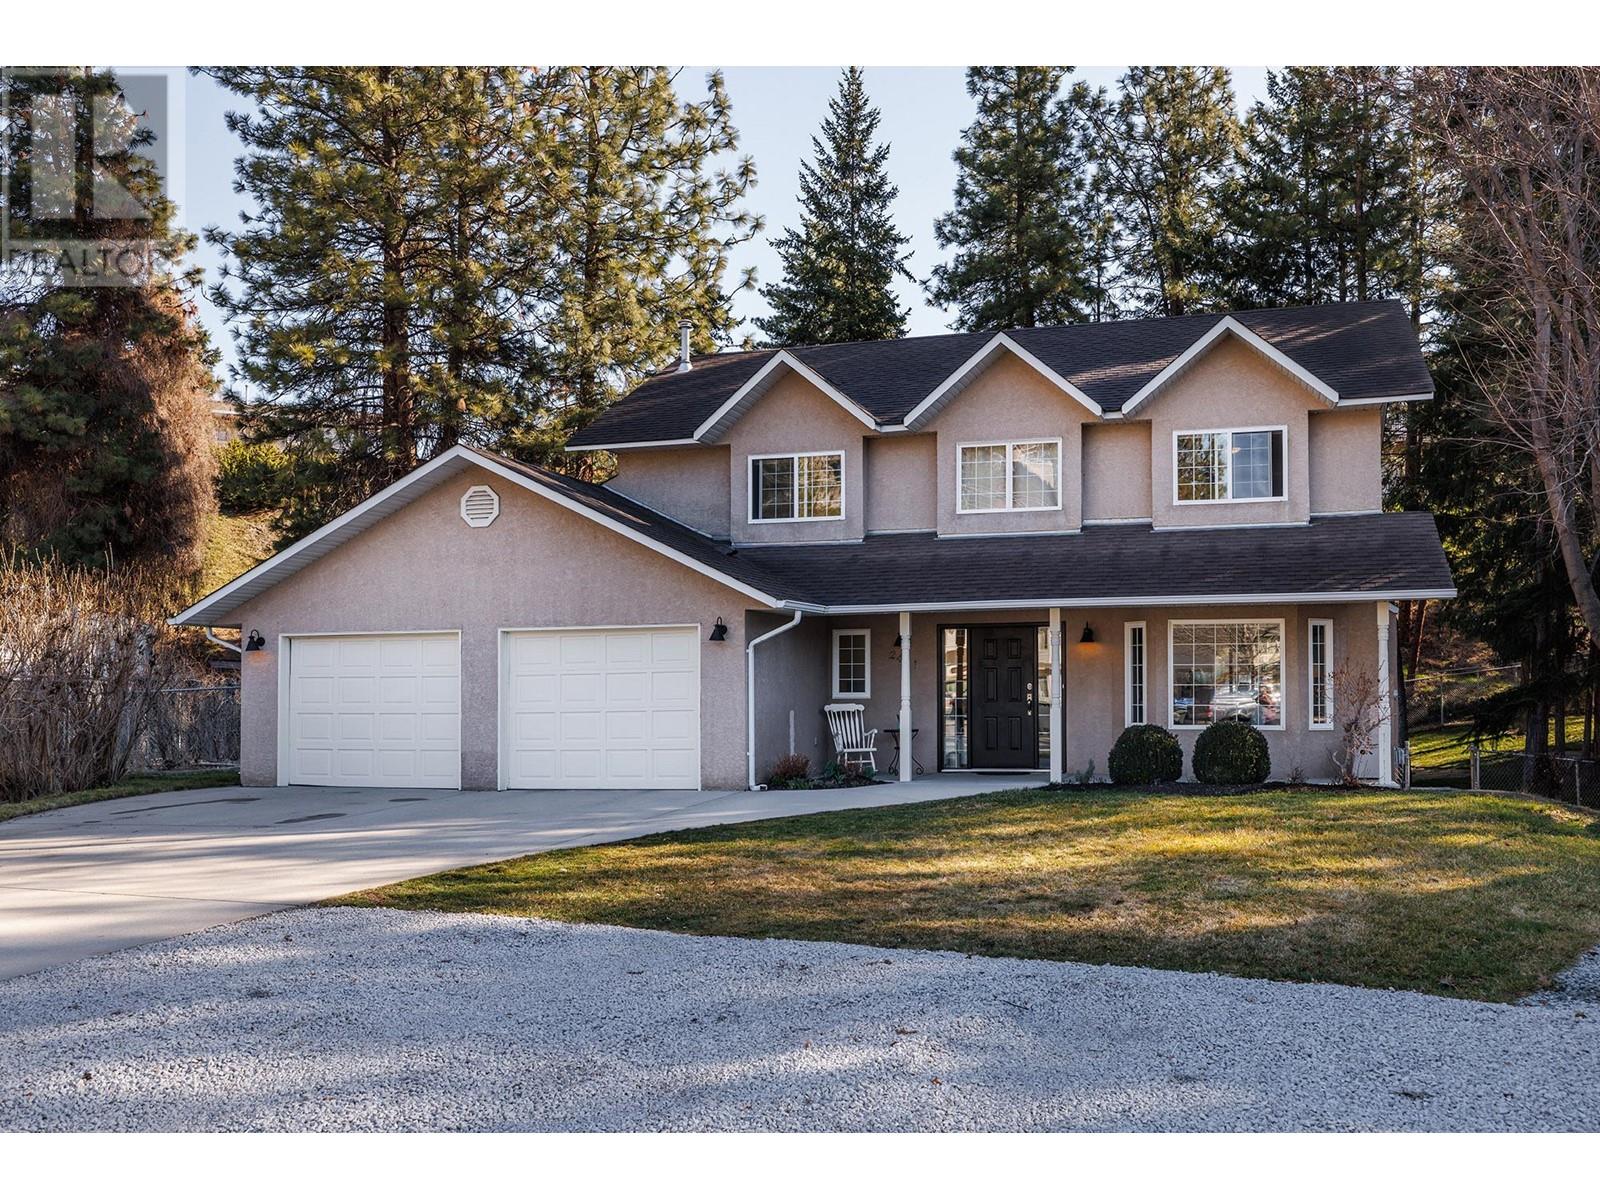  2431 Asquith Court, West Kelowna